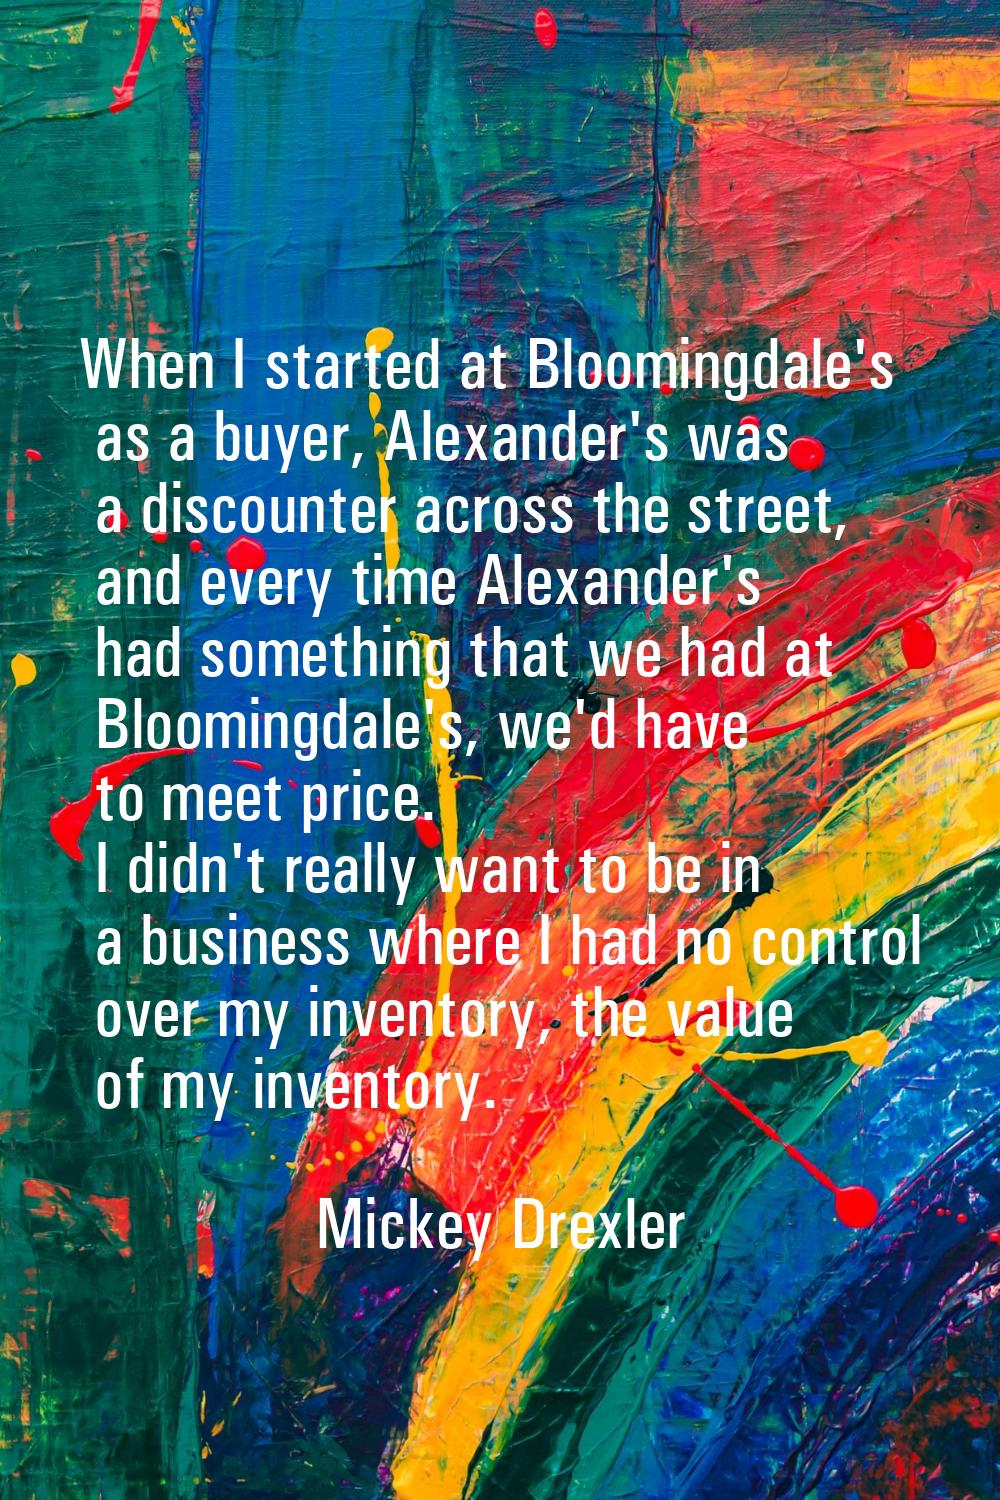 When I started at Bloomingdale's as a buyer, Alexander's was a discounter across the street, and ev